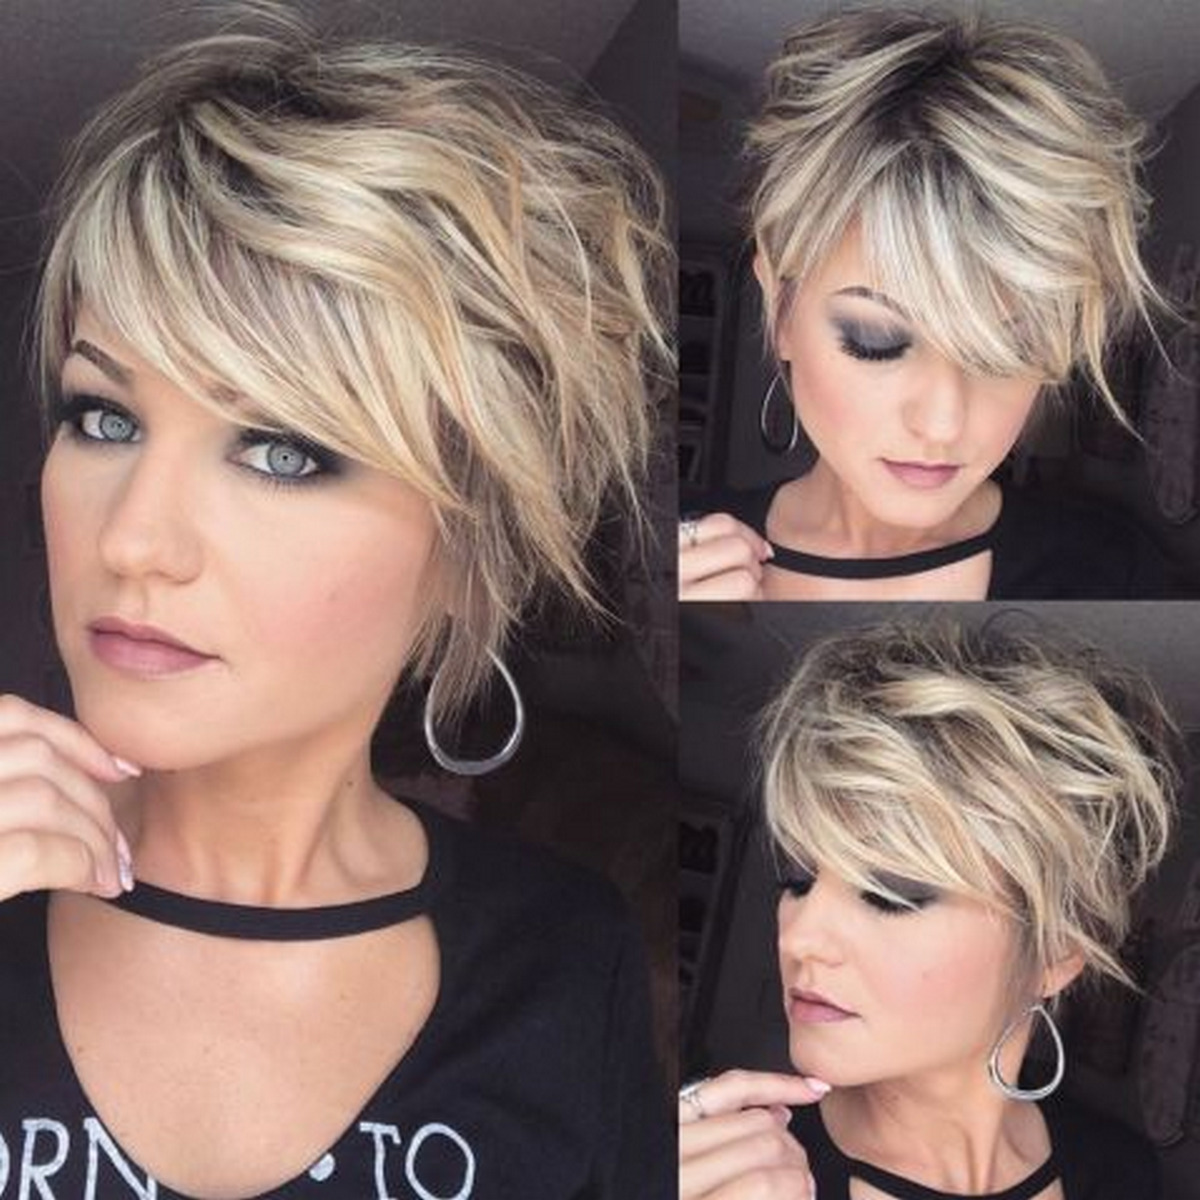 Long Blonde Balayage Pixie With Shaggy Bangs